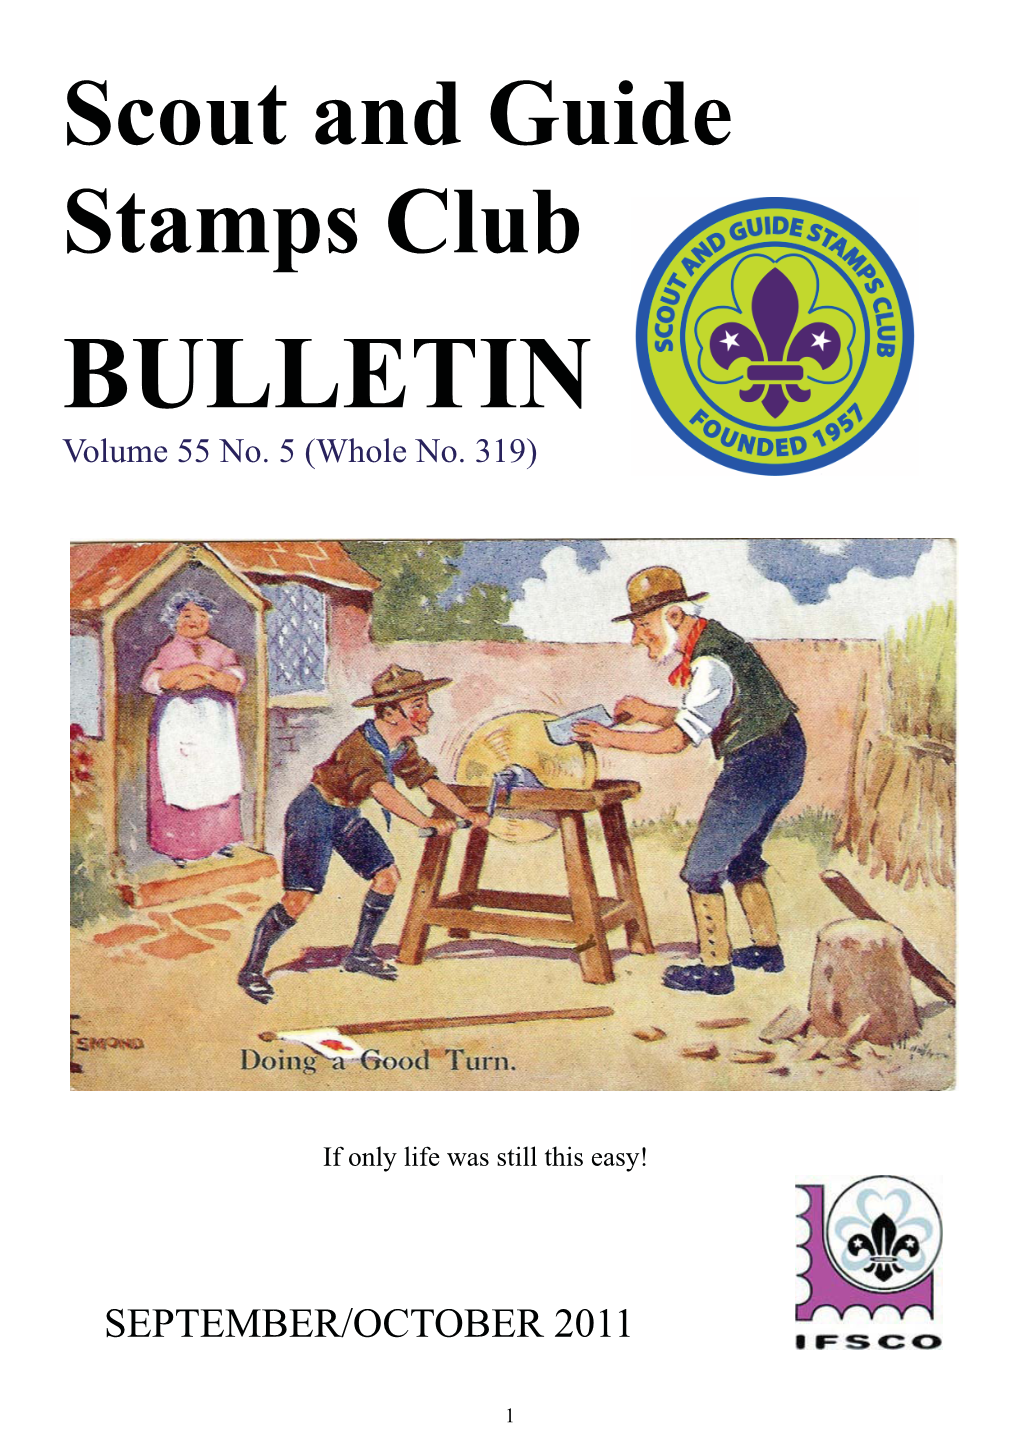 Scout and Guide Stamps Club BULLETIN #319